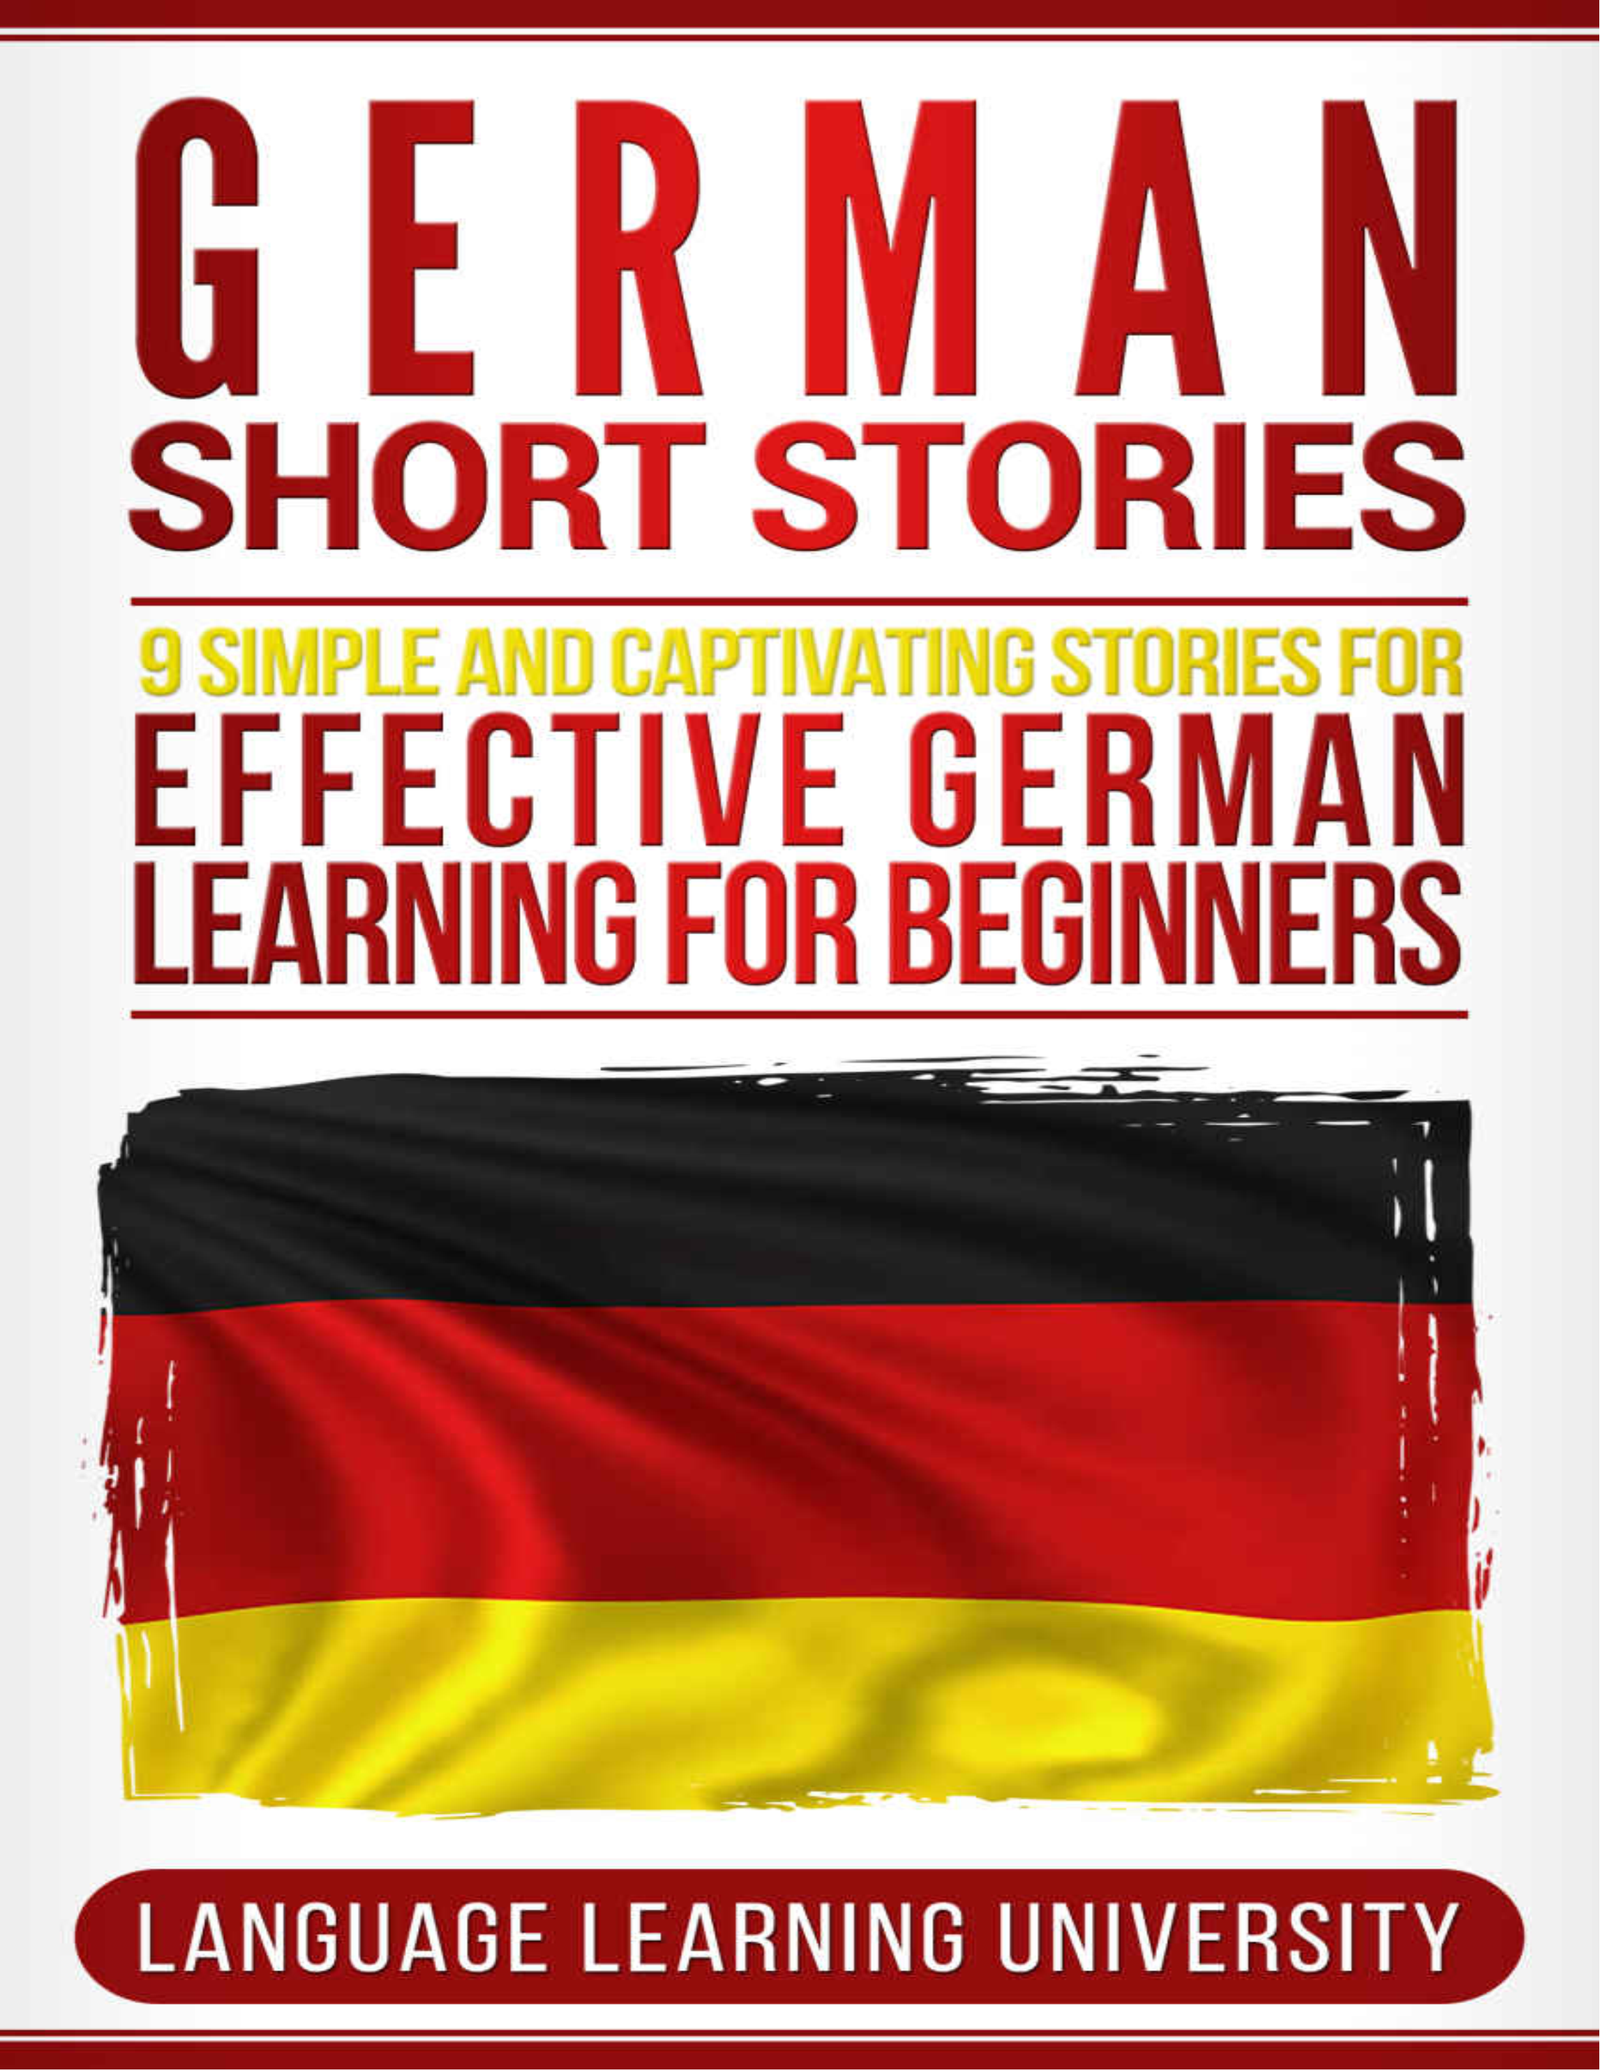 Rich Results on Google's SERP when searching for ''German Short Stories 9 Simple And Captivating Stories''